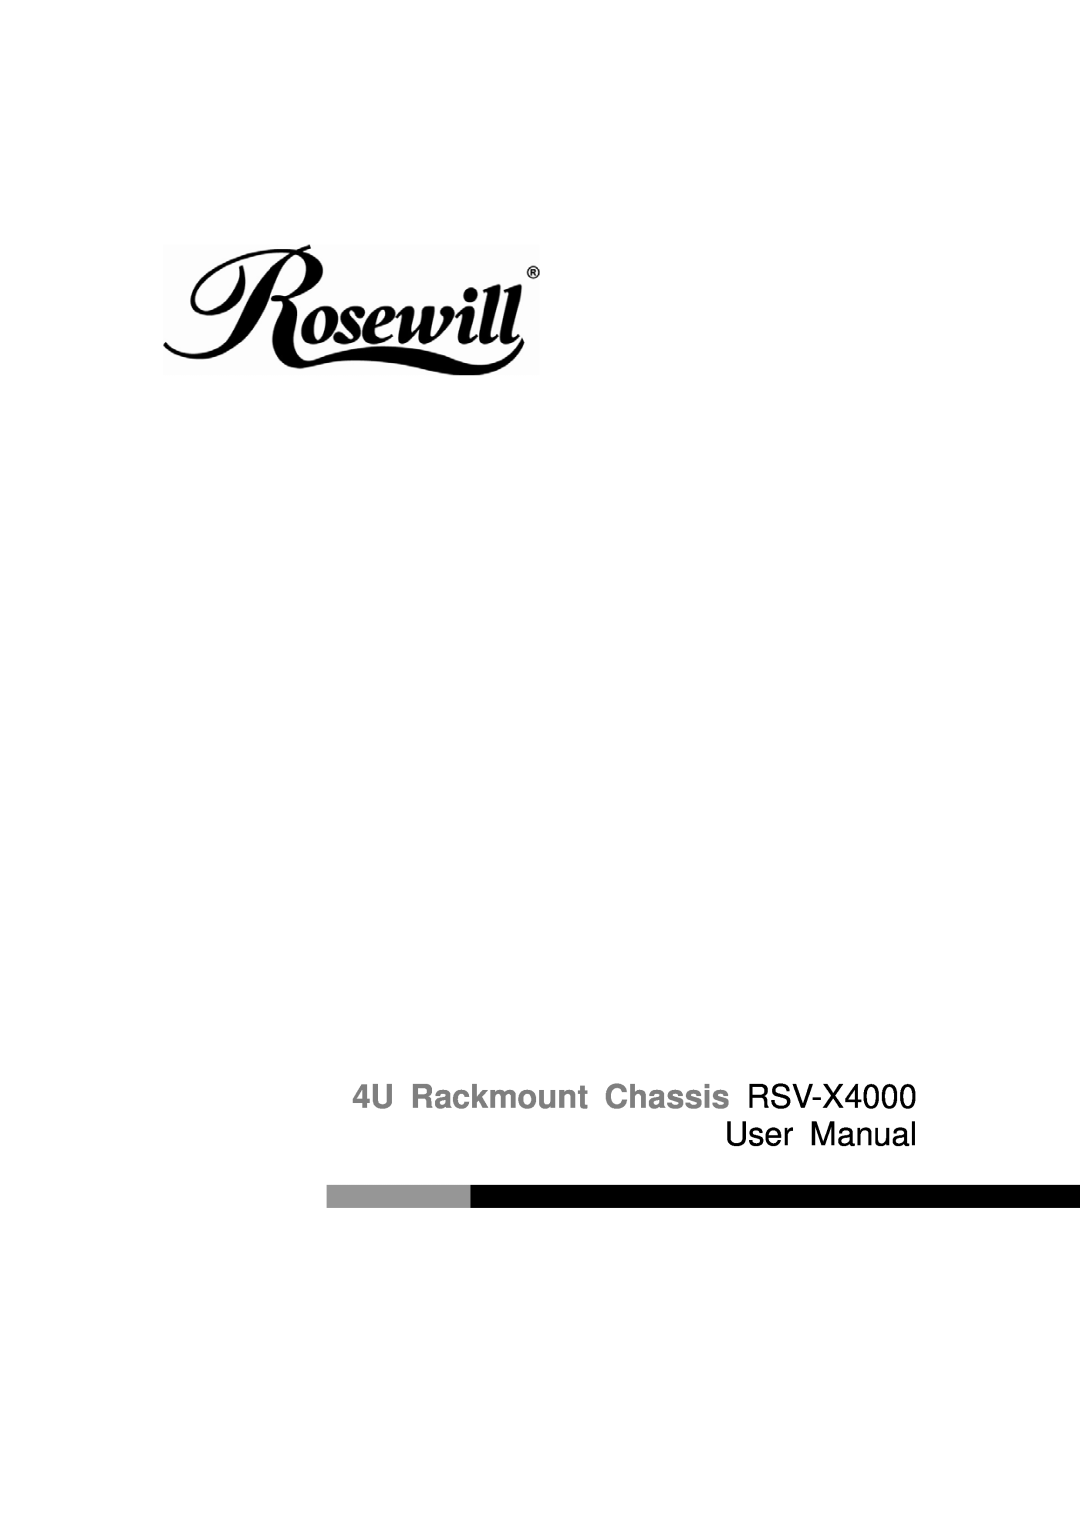 Rosewill user manual 4U Rackmount Chassis RSV-X4000, User Manual 